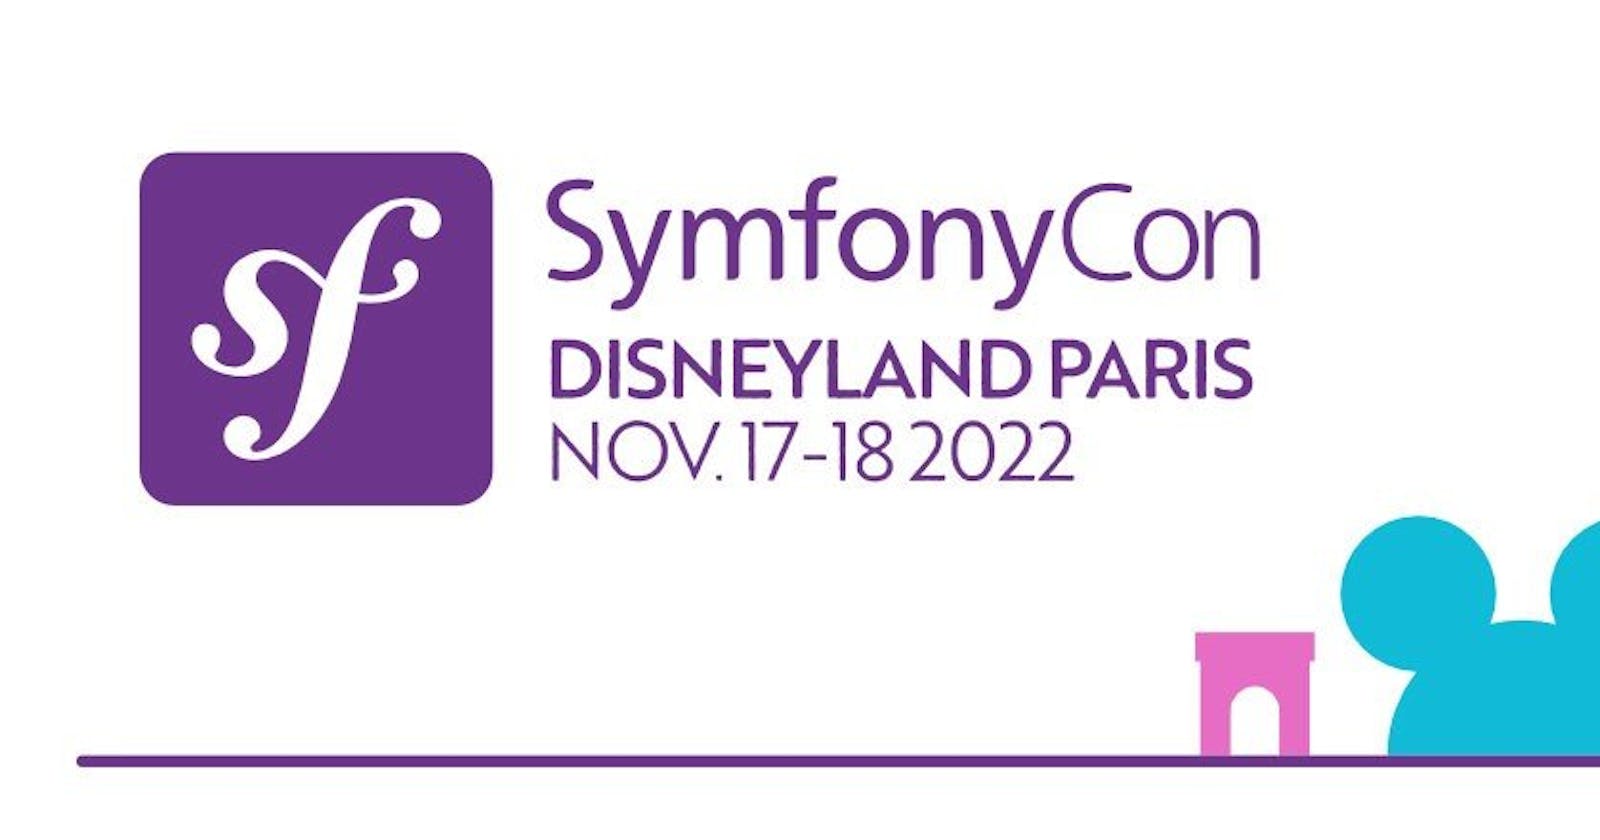 A SymfonyCon Disneyland Paris 2022 preview: 2 workshops and 9 compelling sessions to eagerly anticipate